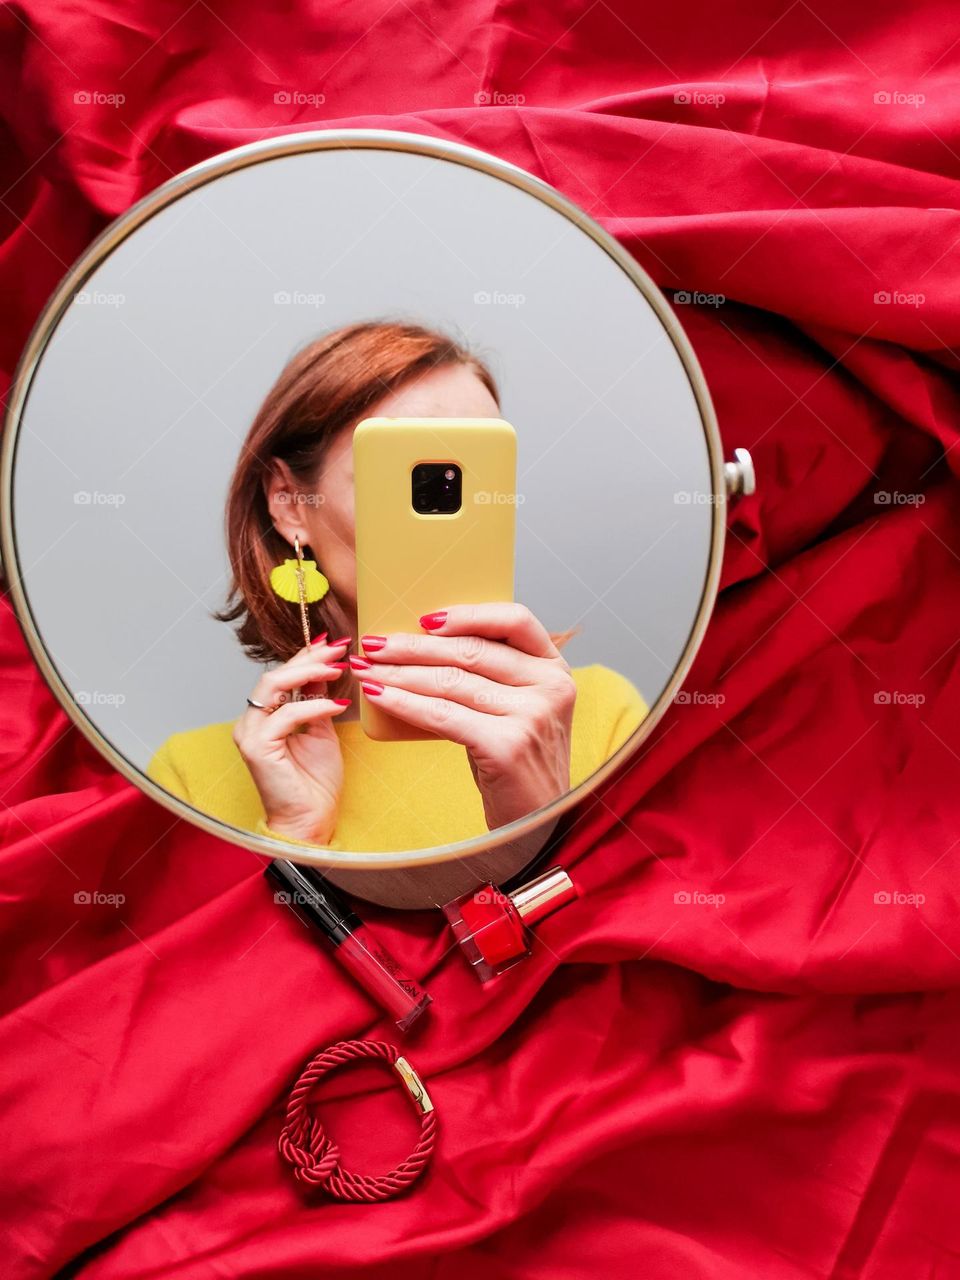 Selfie time, reflection in the mirror. Red and yellow my favourite colours. ❤️💛 Huawei mate 20 pro.